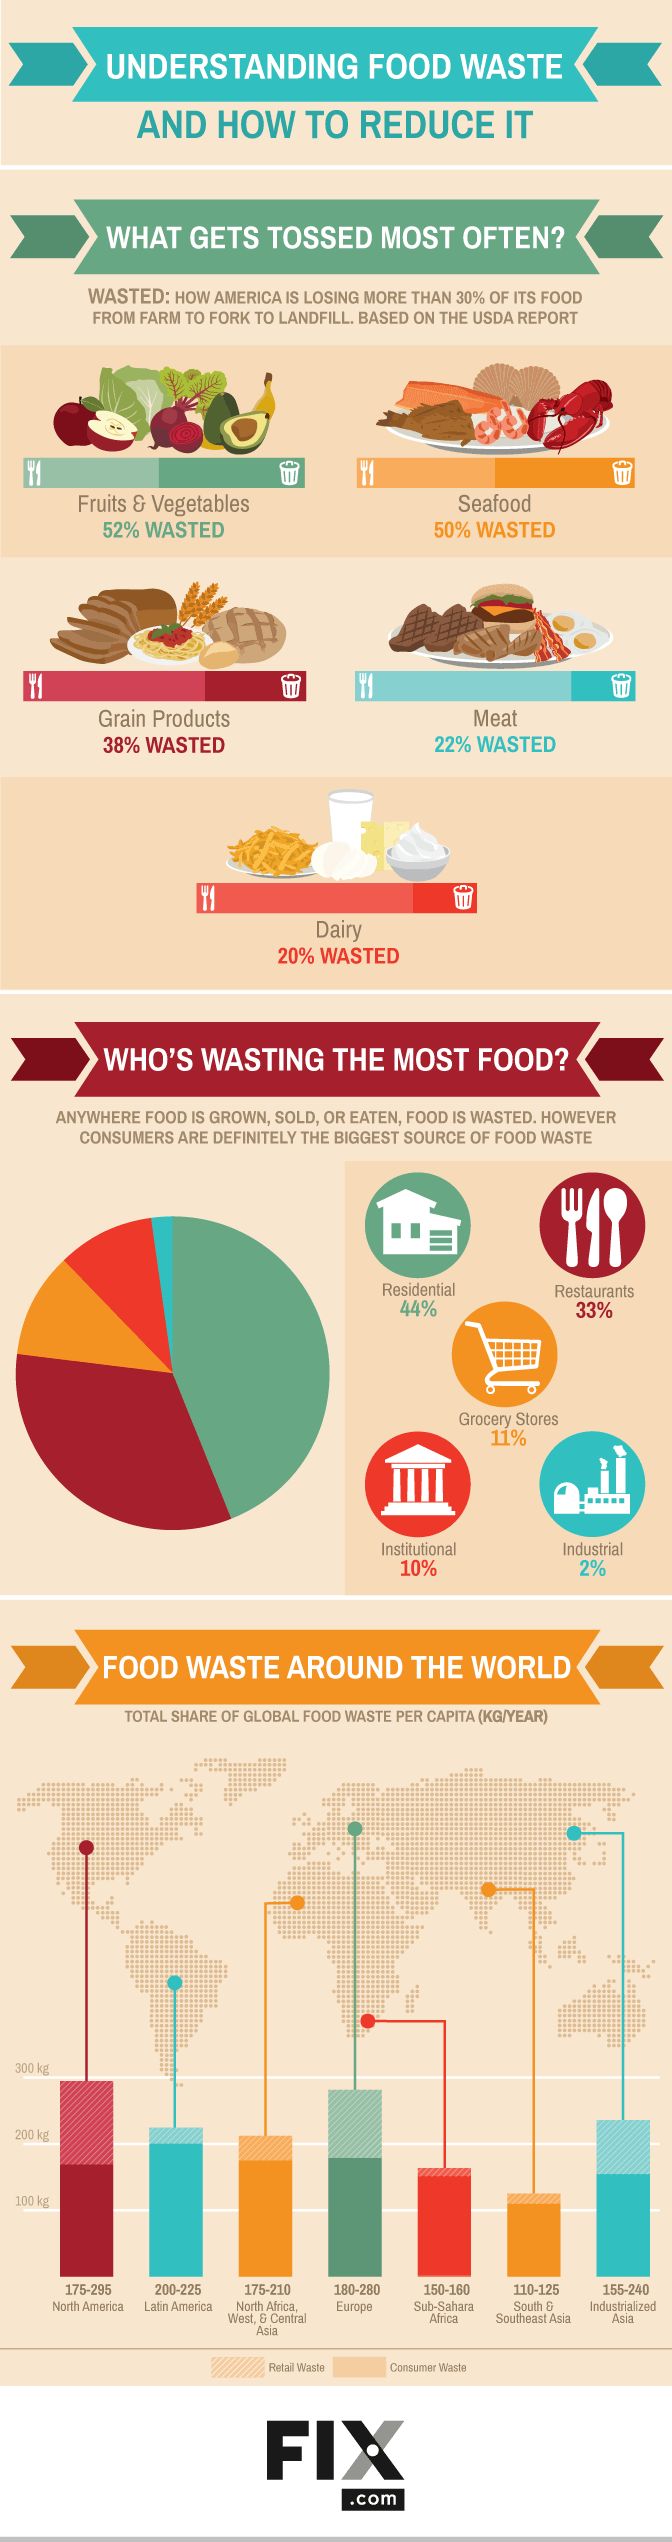 Infographic Design - The food waste problem is bigger than you might ...